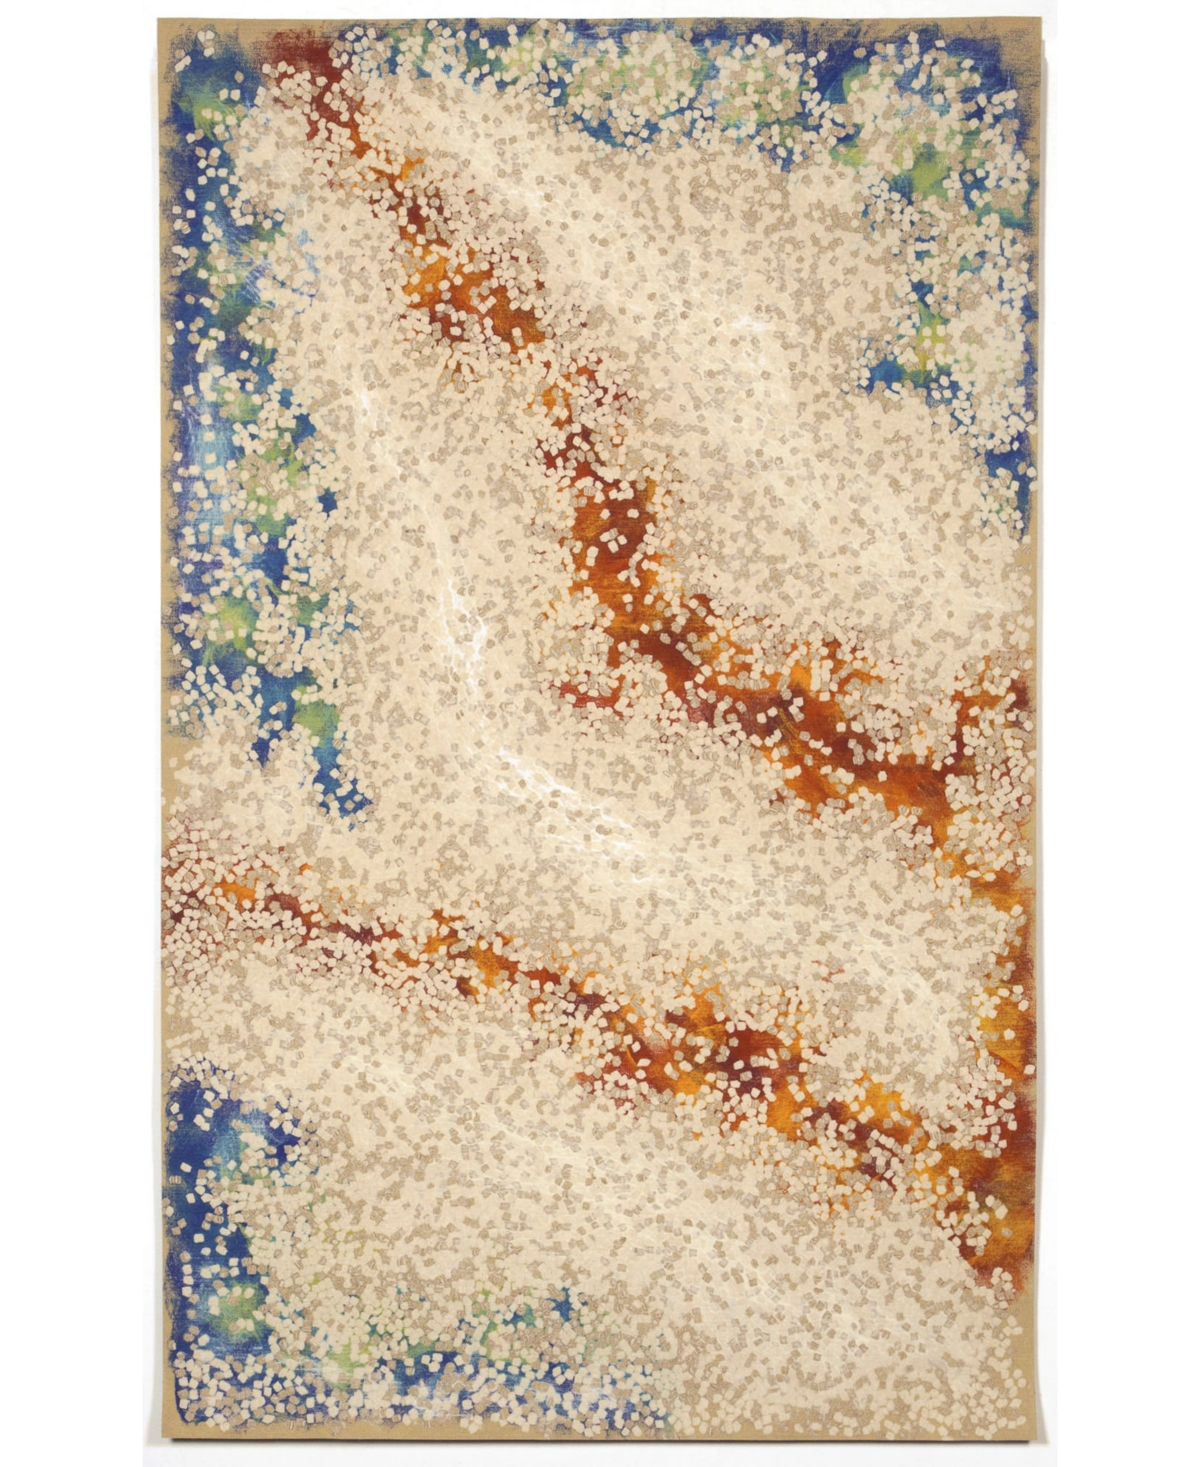 LIORA MANNE VISIONS IV ELEMENTS 5' X 8' OUTDOOR AREA RUG